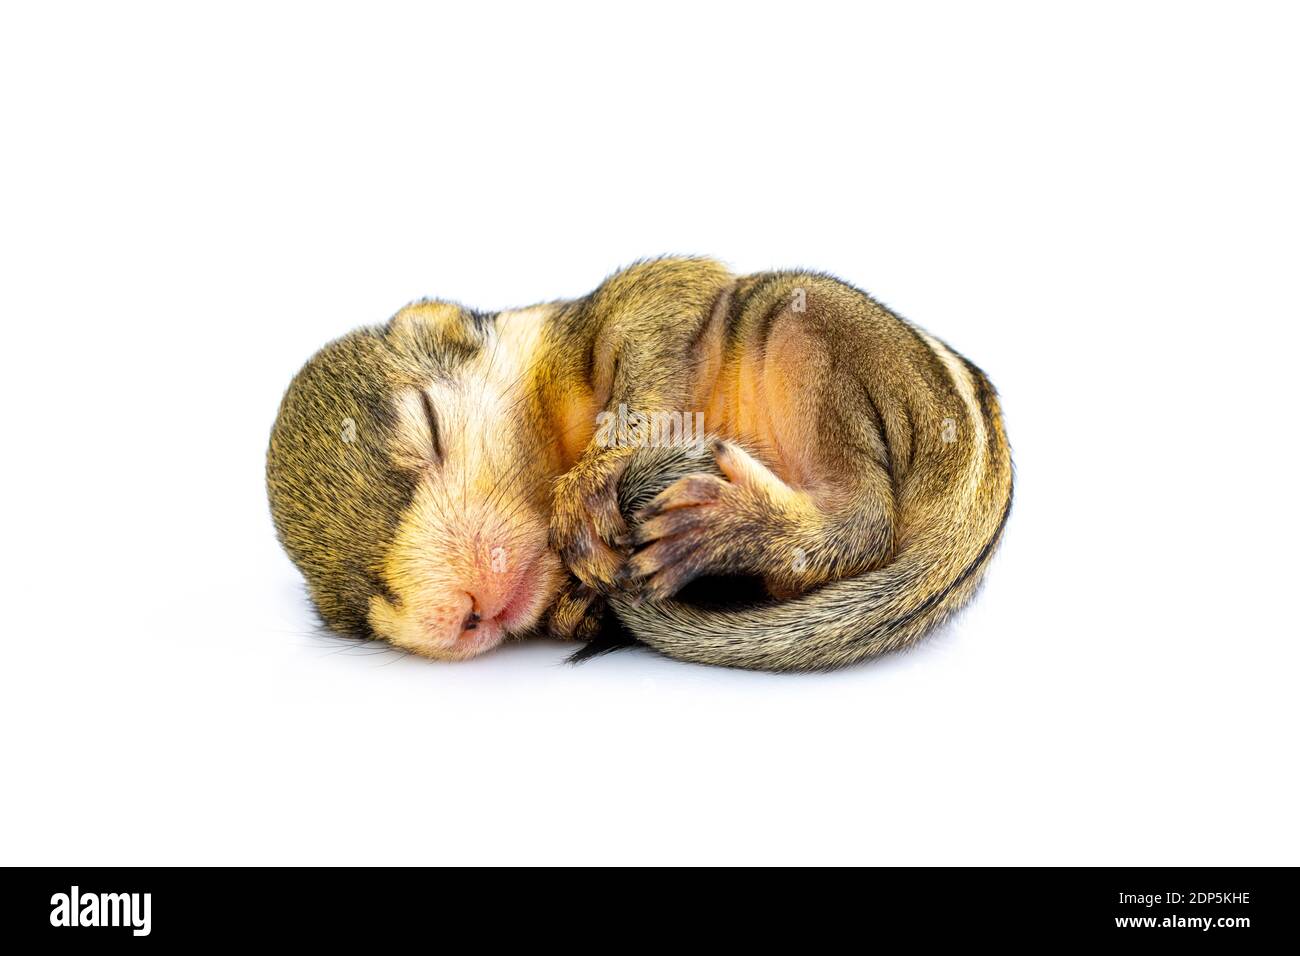 Baby himalayan striped squirrel or Baby burmese striped squirrel(Tamiops mcclellandii) on white background. Wild Animals. Stock Photo